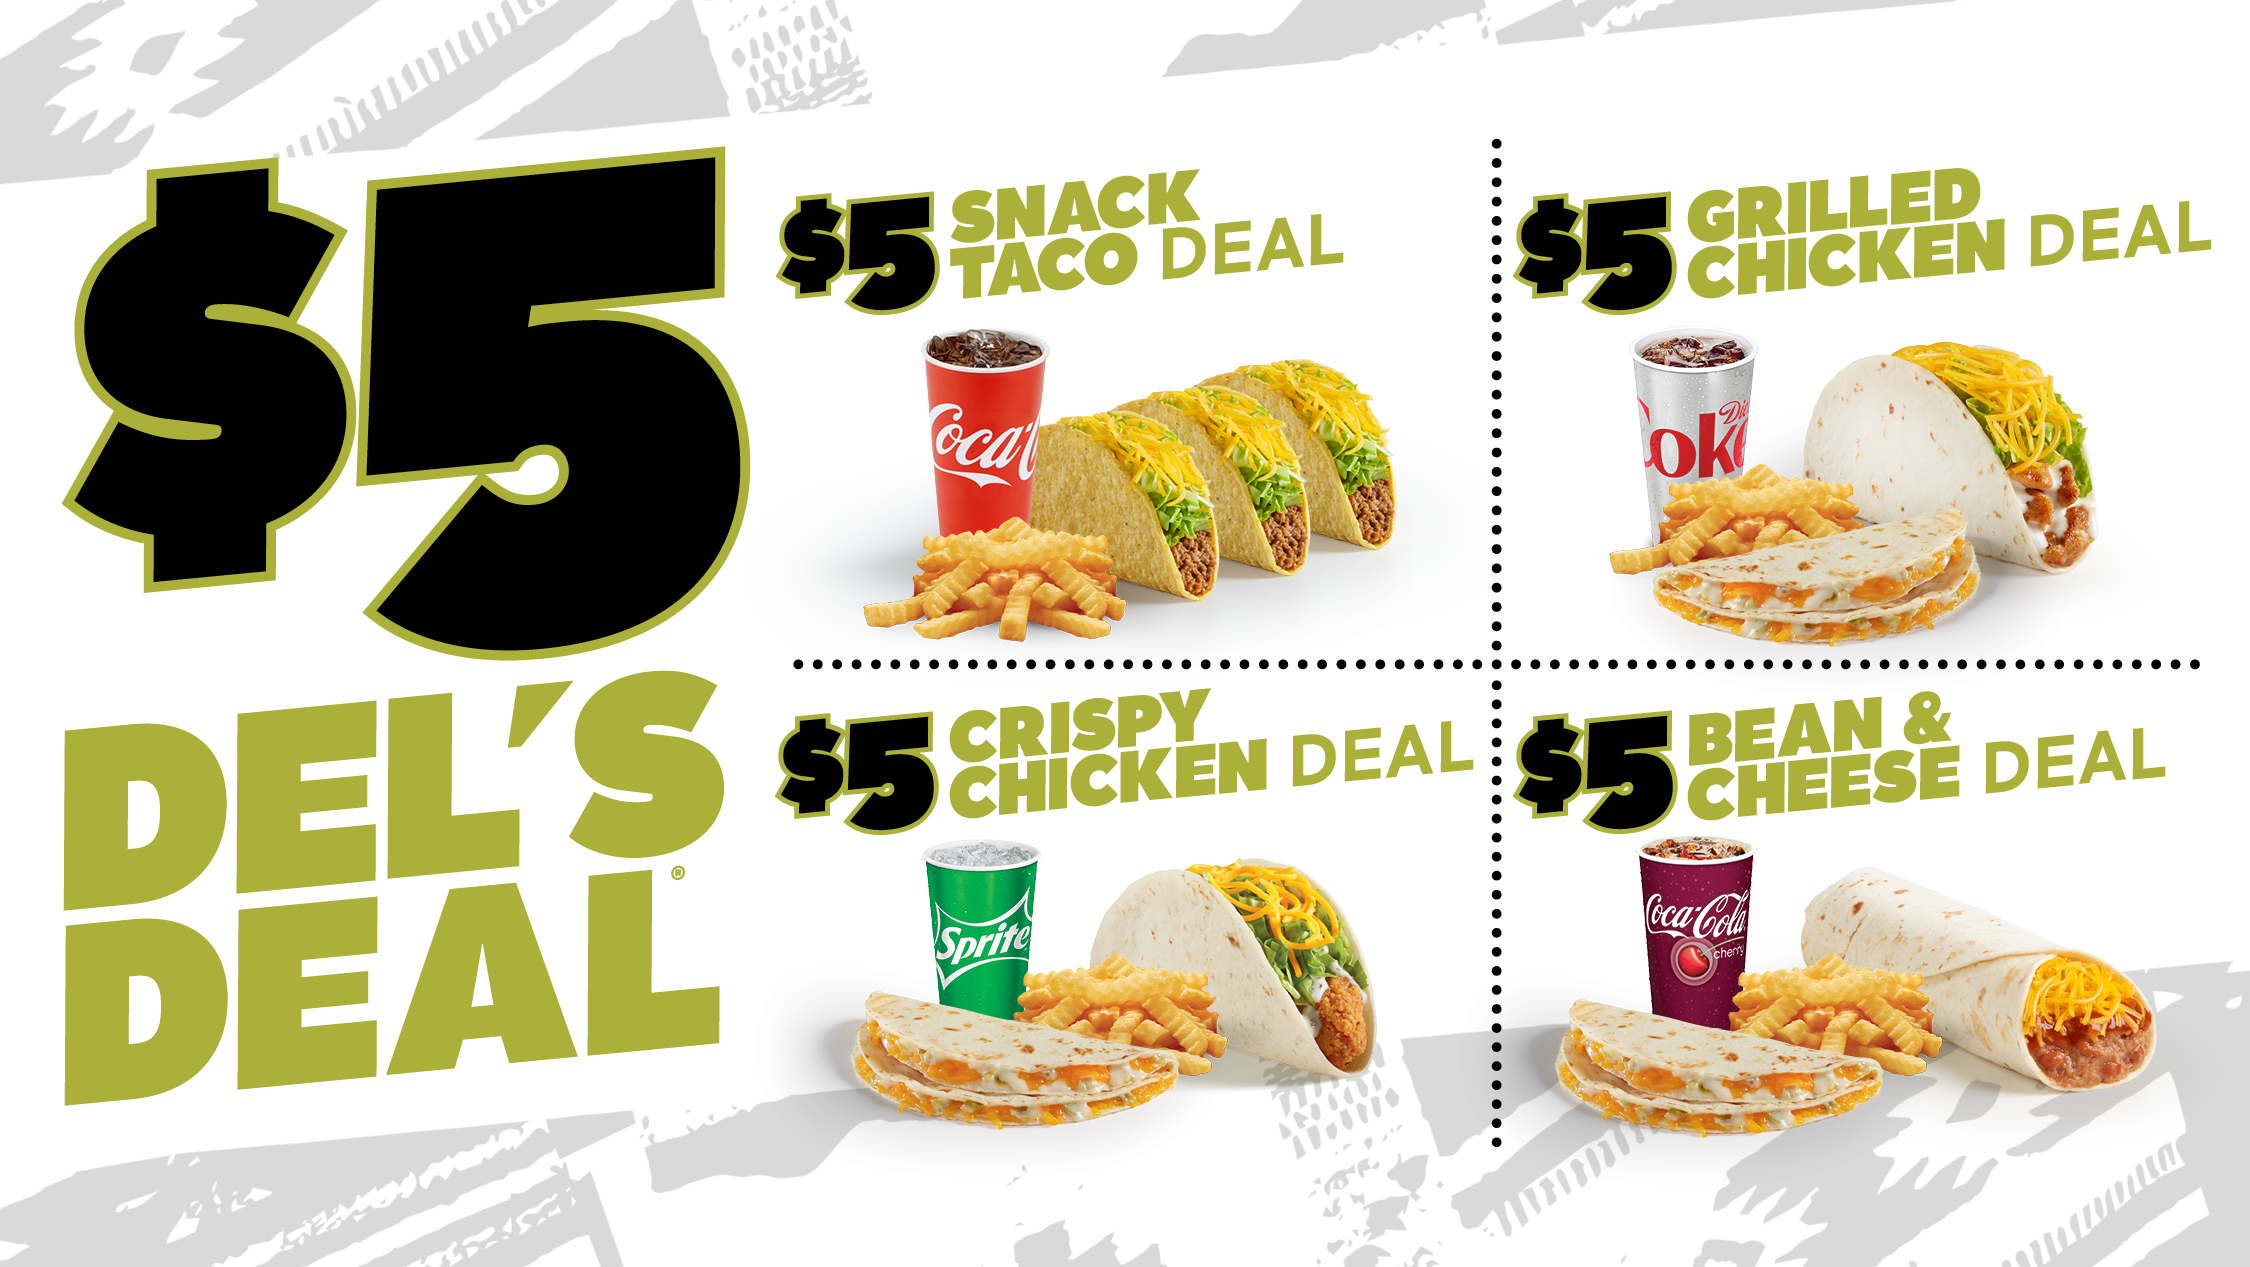 Value meal specials